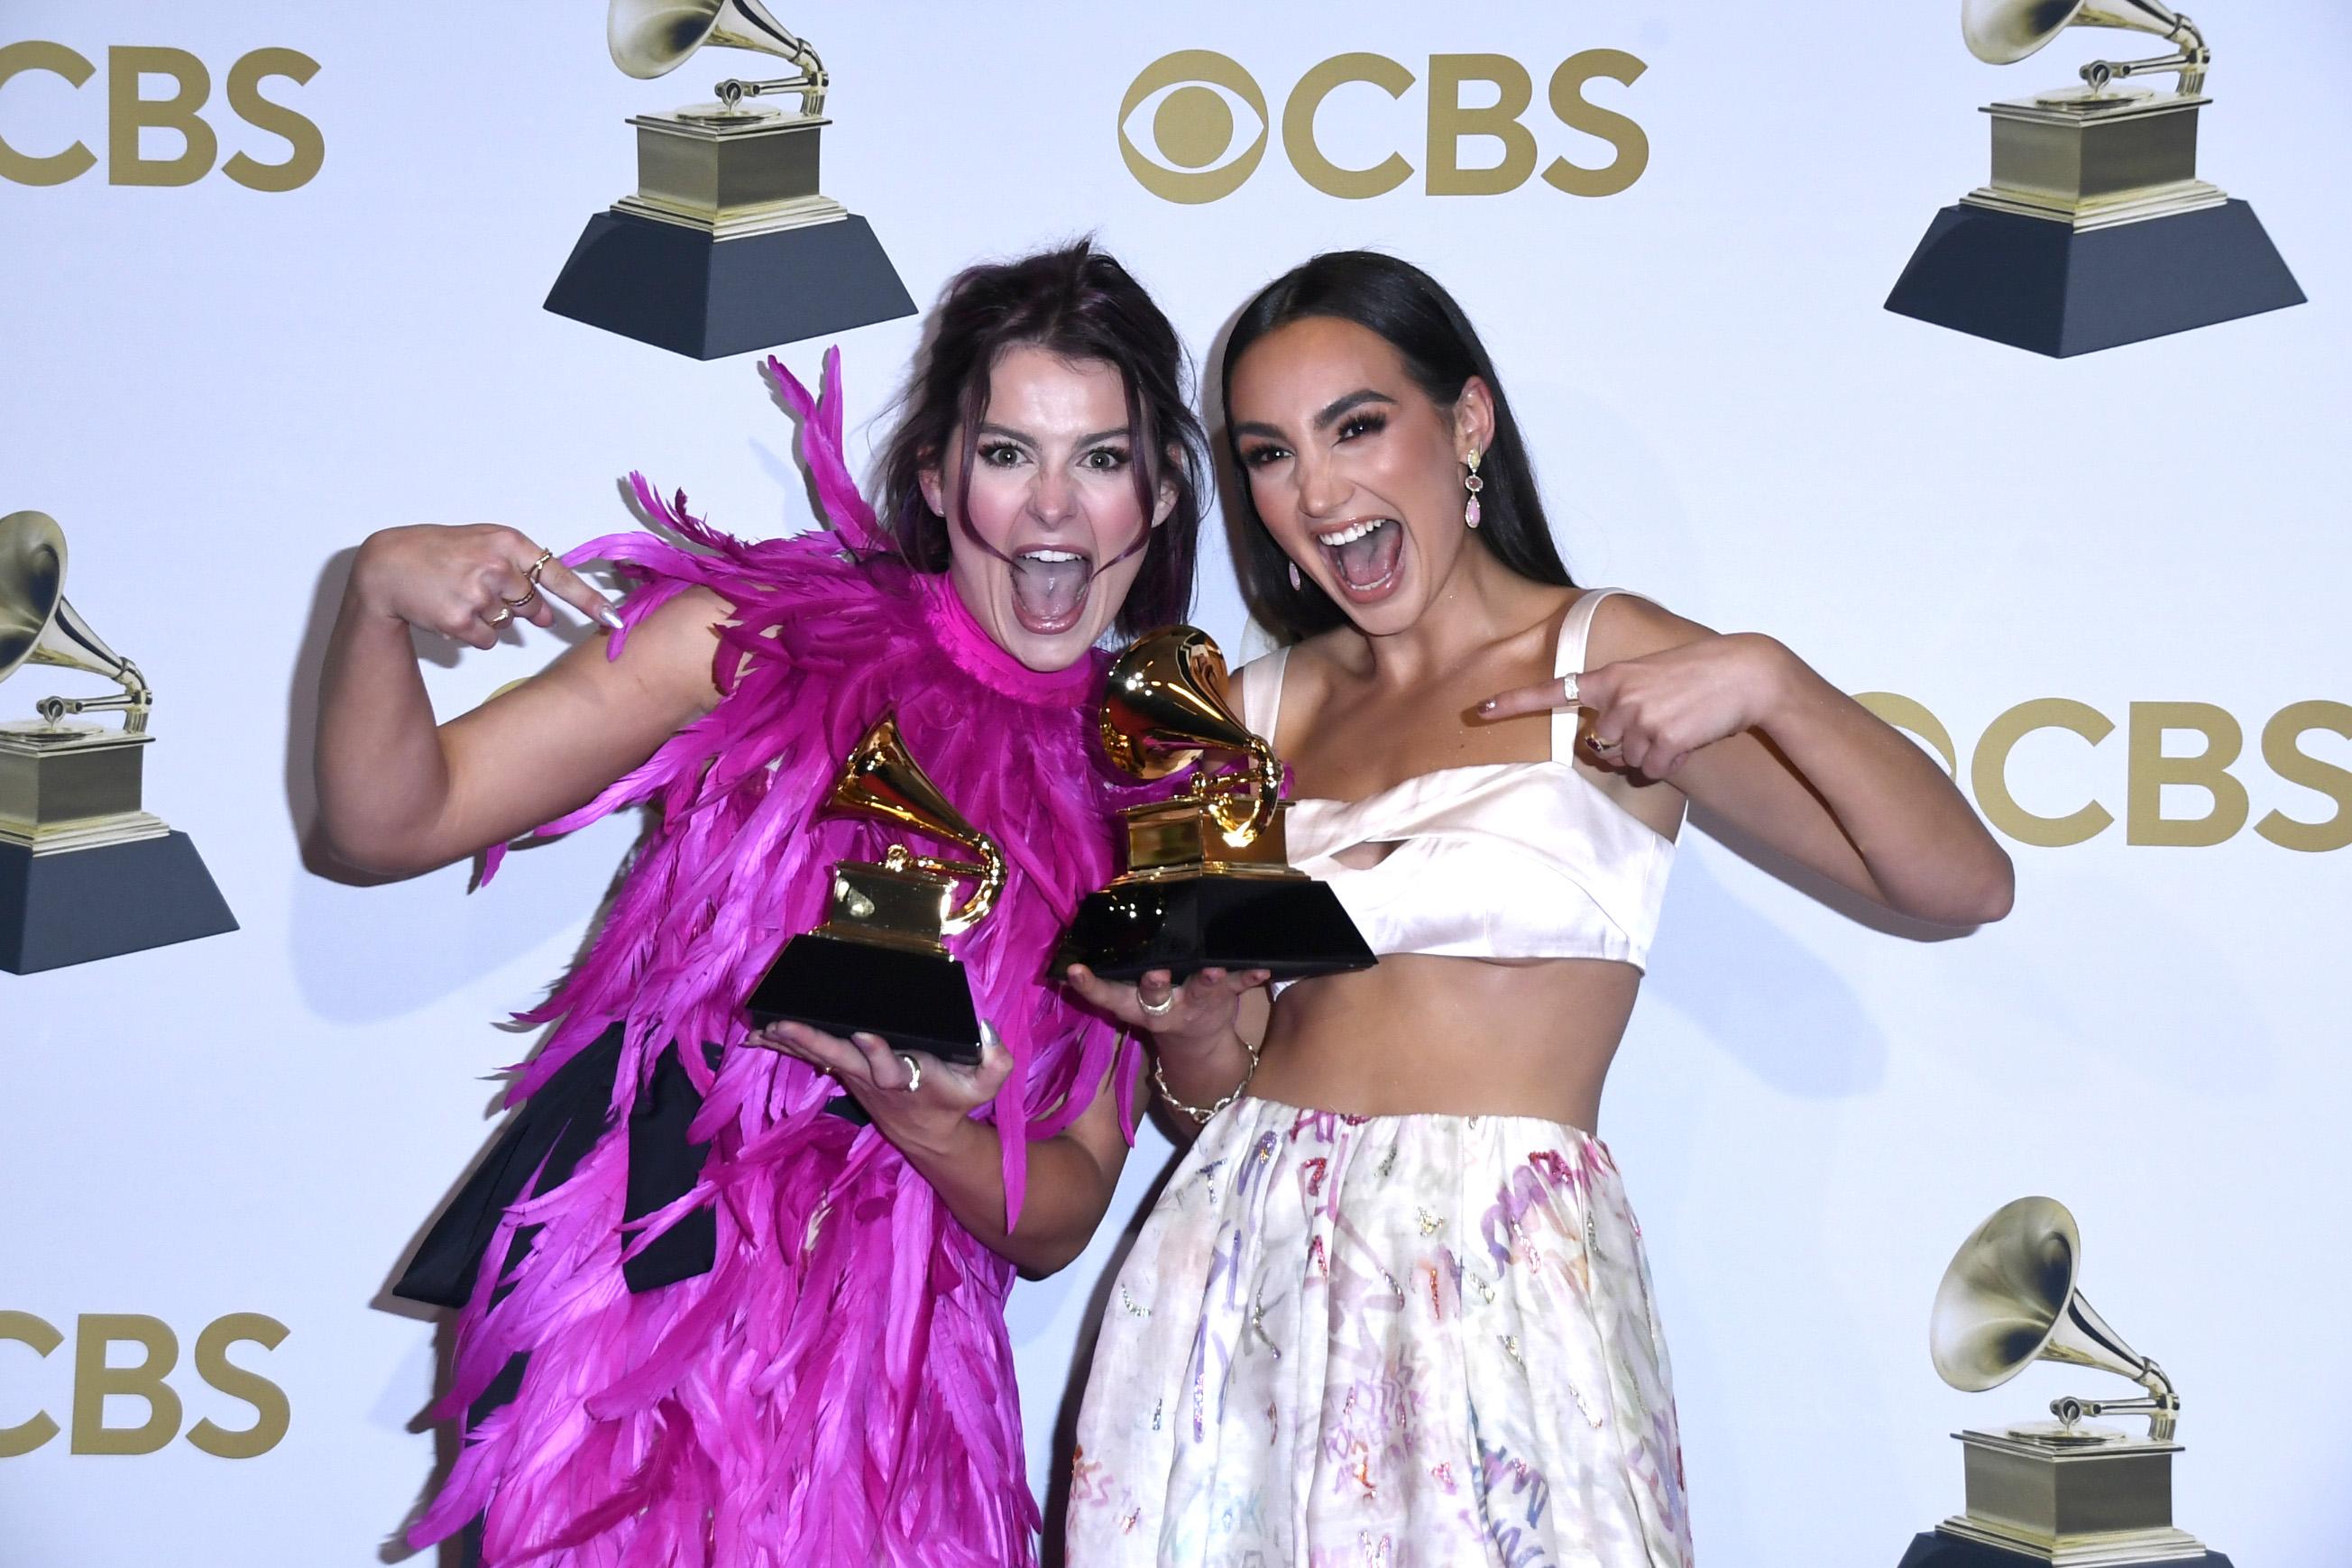 LAS VEGAS, NEVADA - APRIL 03: (L-R) Abigail Barlow and Emily Bear, winners of Best Musical Theater Album for "The Unofficial Bridgerton Musical" pose in the press room during the 64th Annual GRAMMY Awards at MGM Grand Garden Arena on April 03, 2022 in Las Vegas, Nevada. (Photo by Mindy Small/Getty Images)